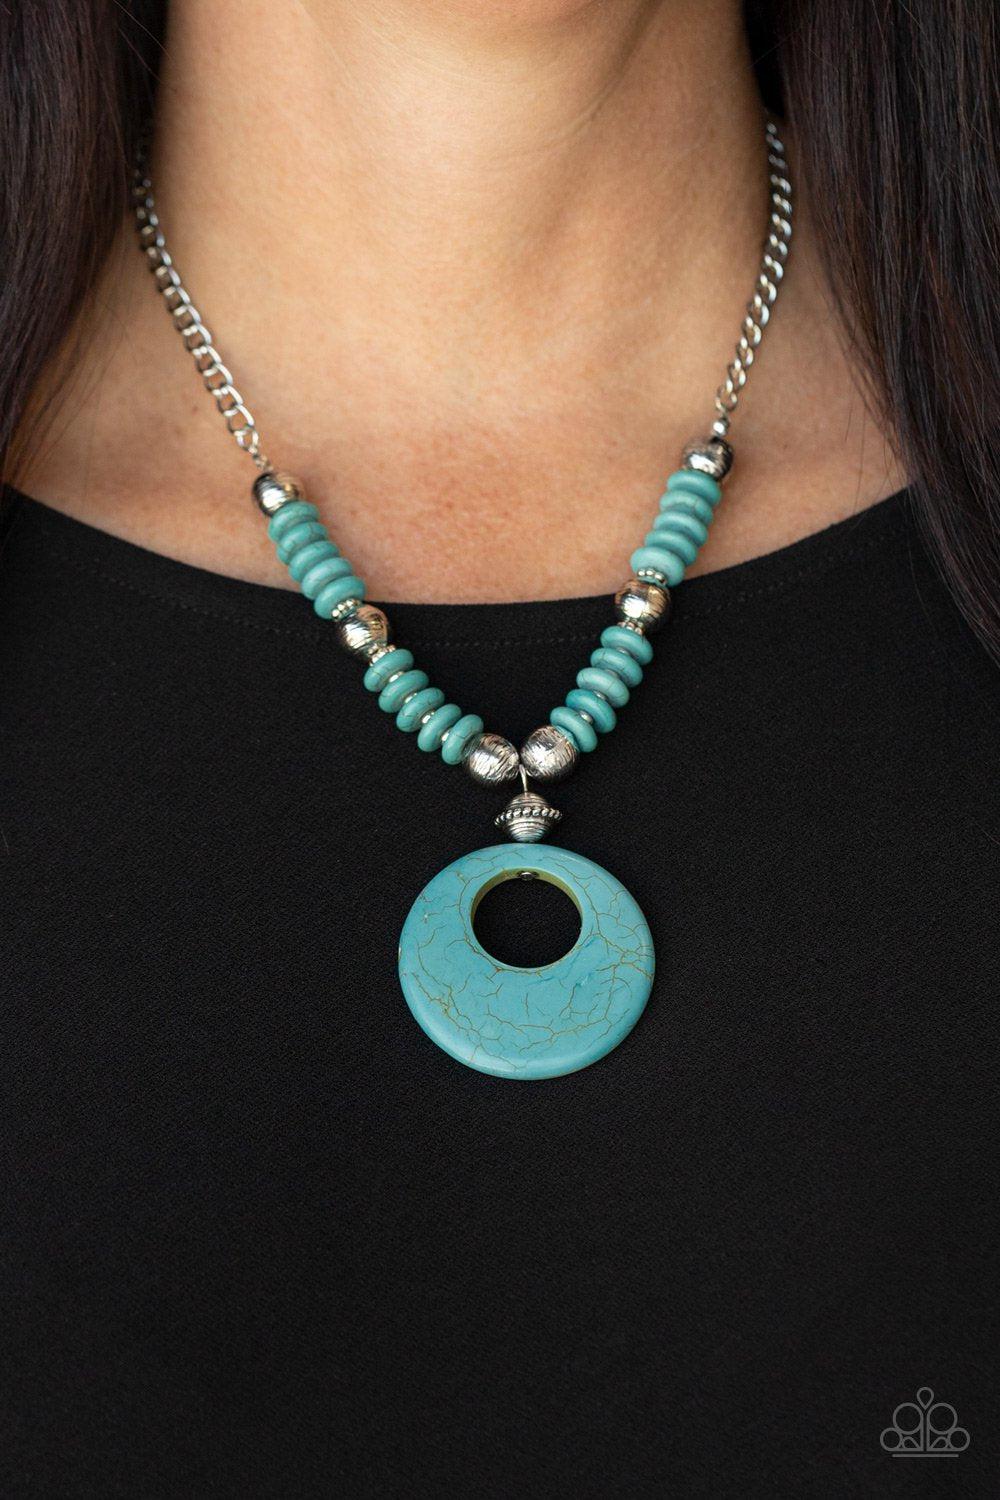 Oasis Goddess Turquoise Blue Stone and Silver Necklace - Paparazzi Accessories 2021 Convention Exclusive- model - CarasShop.com - $5 Jewelry by Cara Jewels